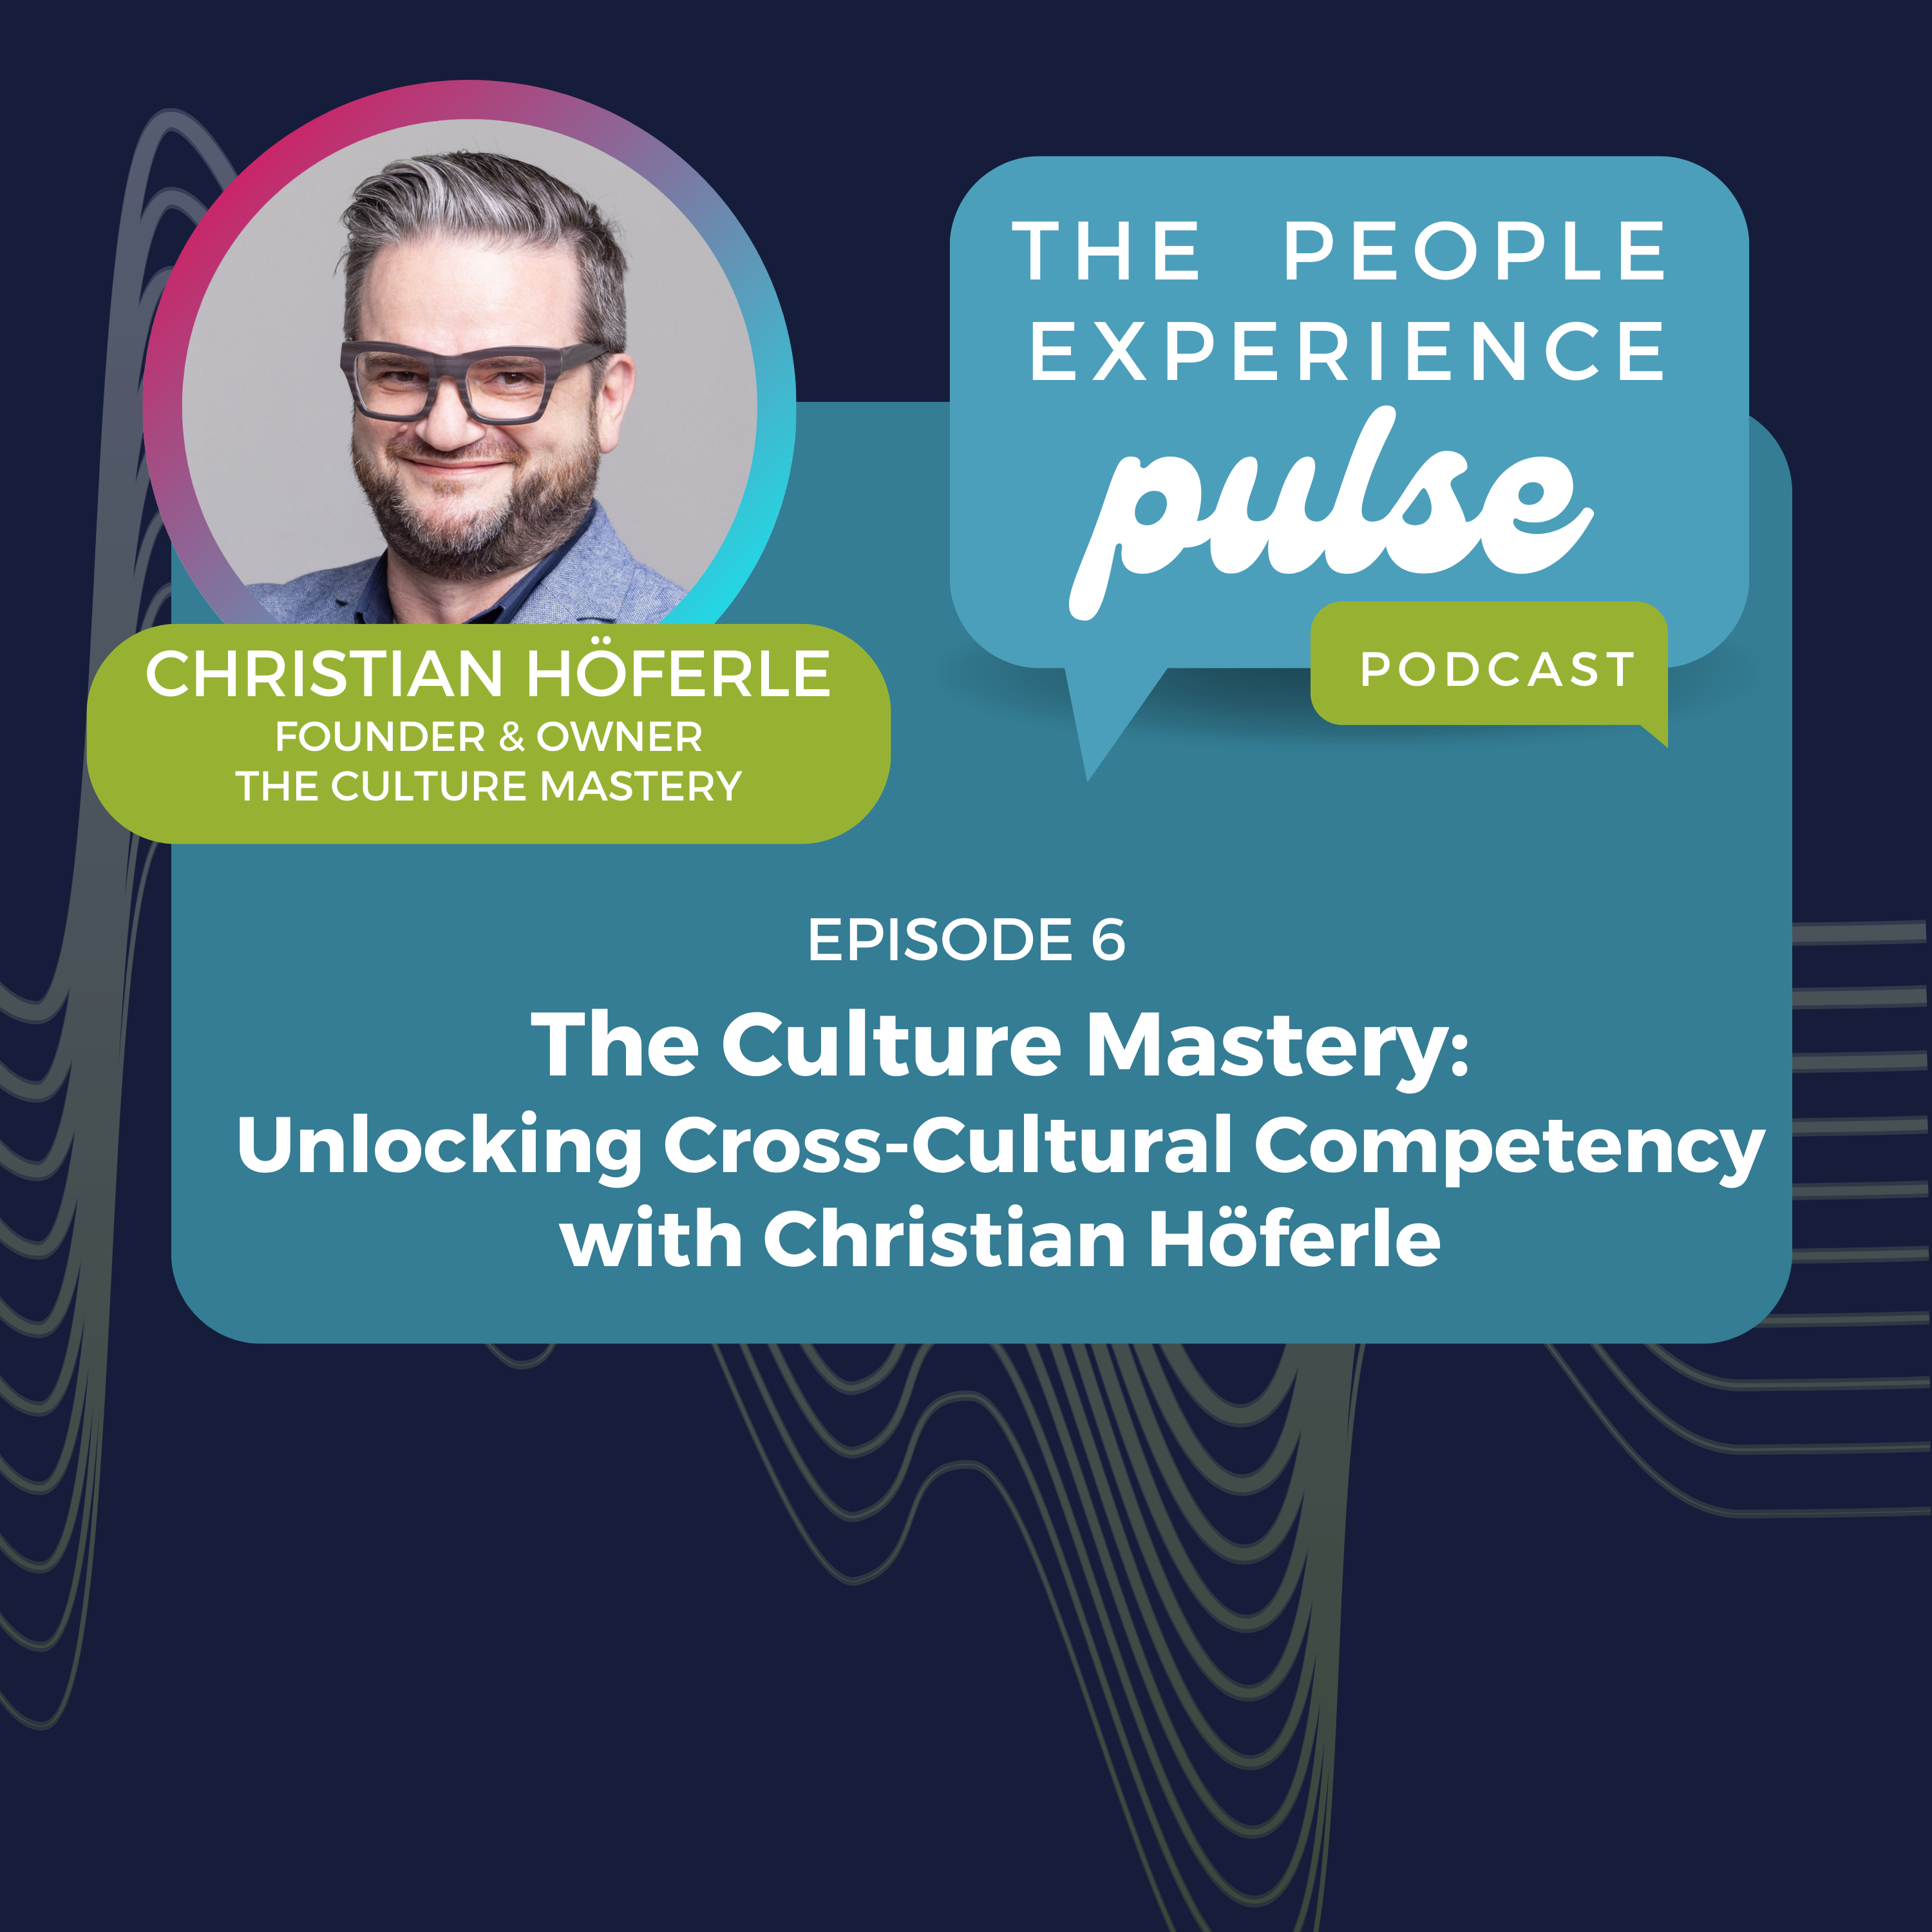 The Culture Mastery: Unlocking Cross-Cultural Competency with Christian Höferle